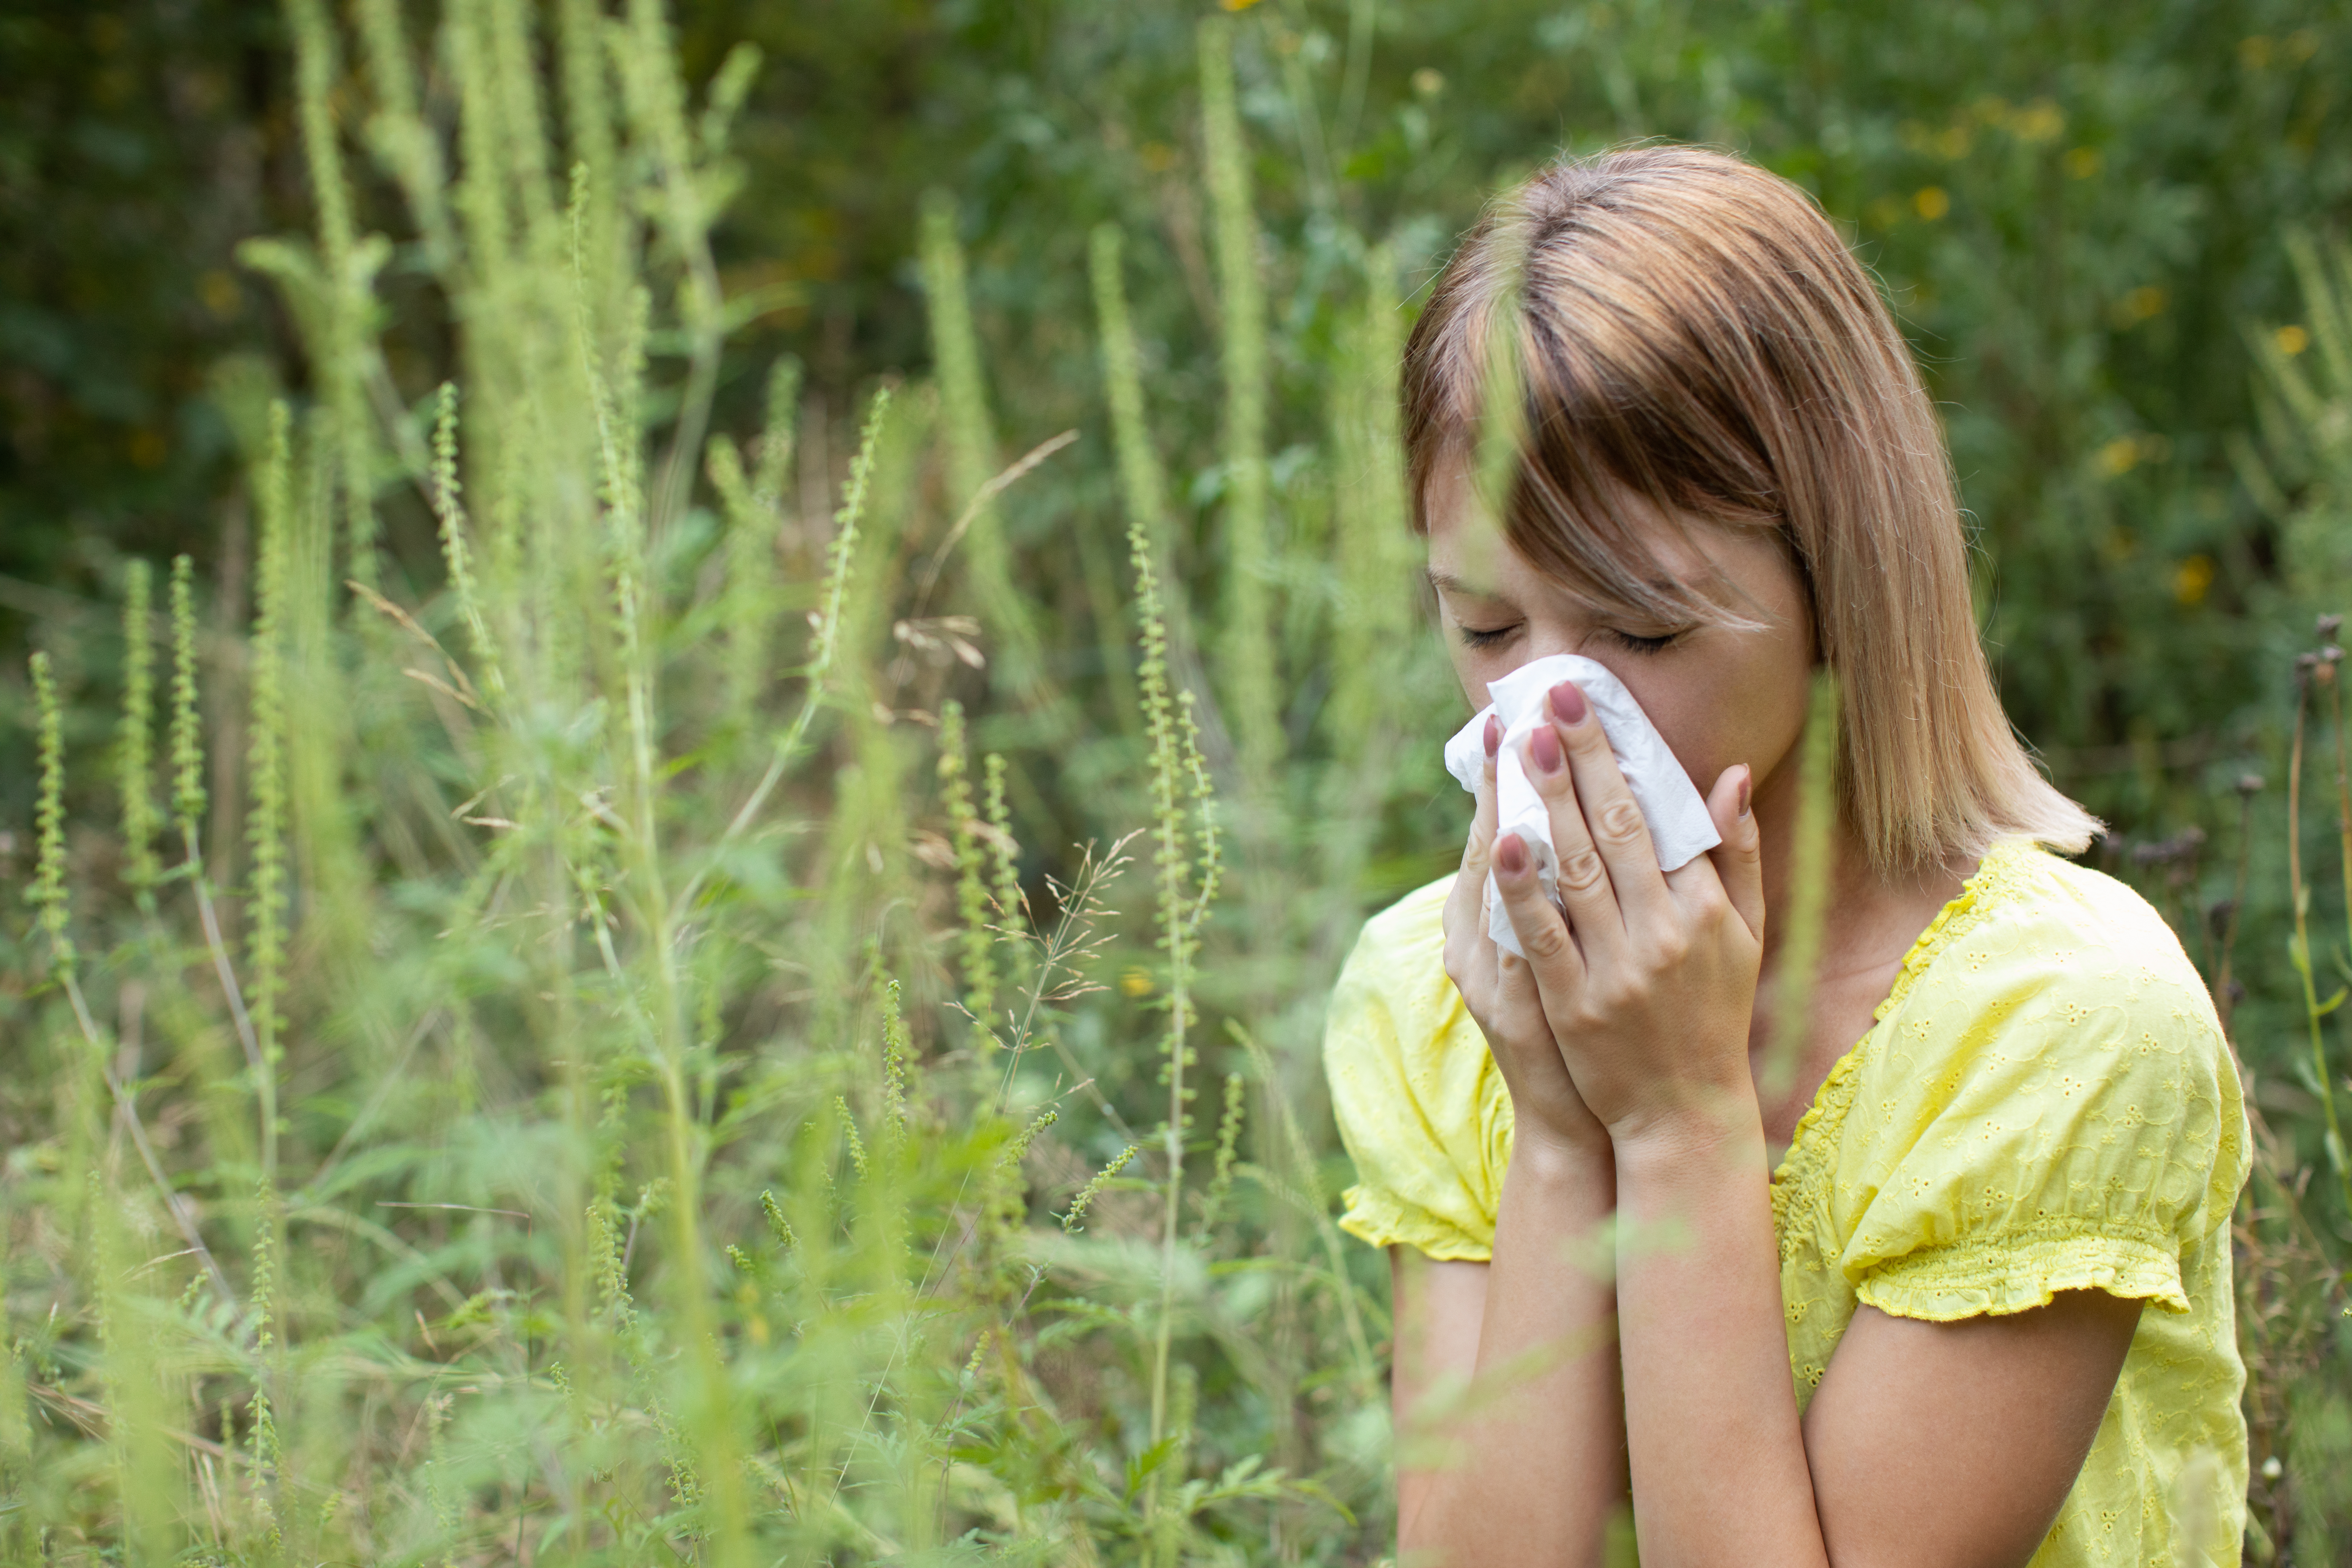 A woman covers her mouth and nose in a field of ragweed.